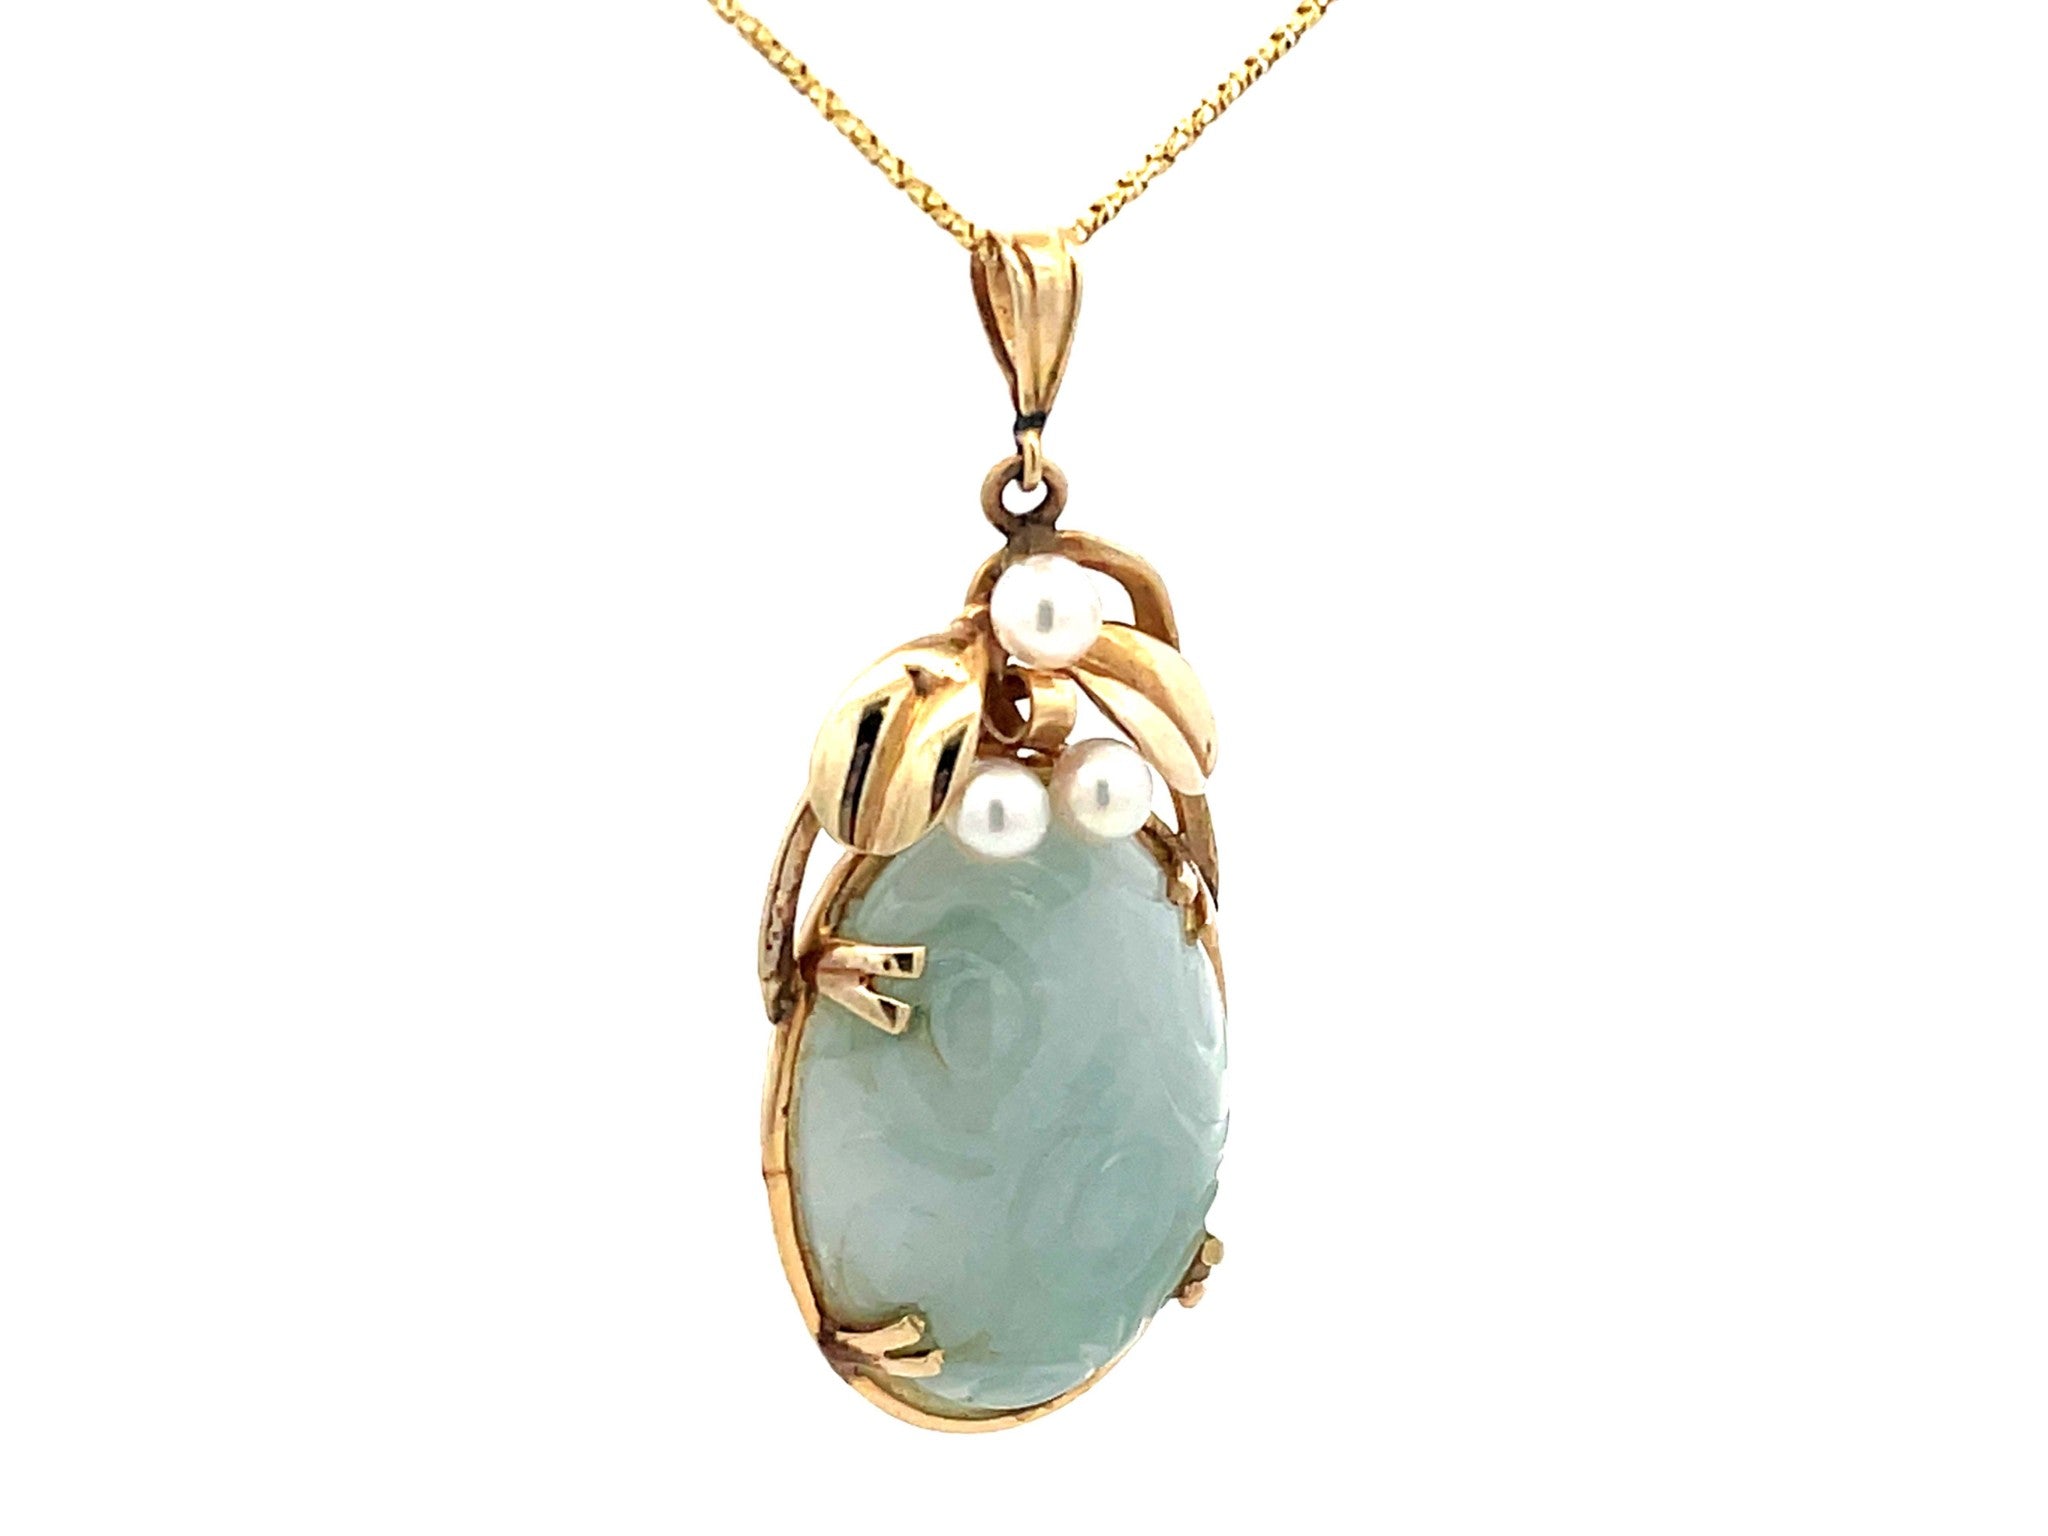 Mings Hawaii Carved Nephrite Jade & Pearl Pendant in 14k Yellow Gold with Chain